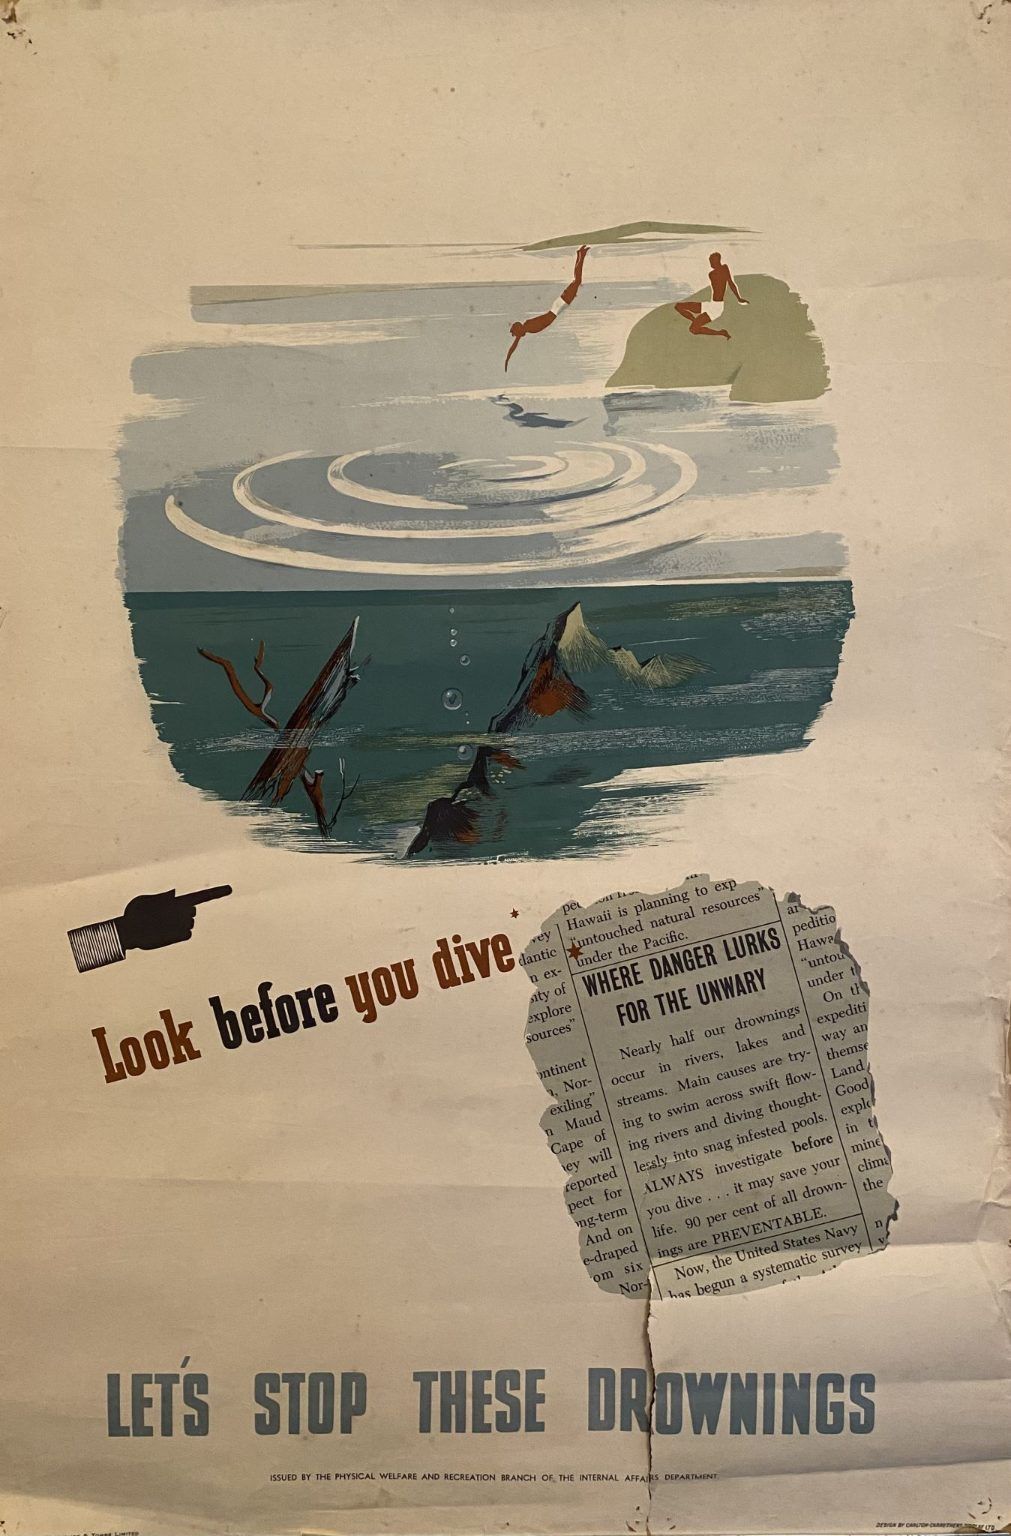 VINTAGE POSTER: Look before you dive - let's stop these drownings